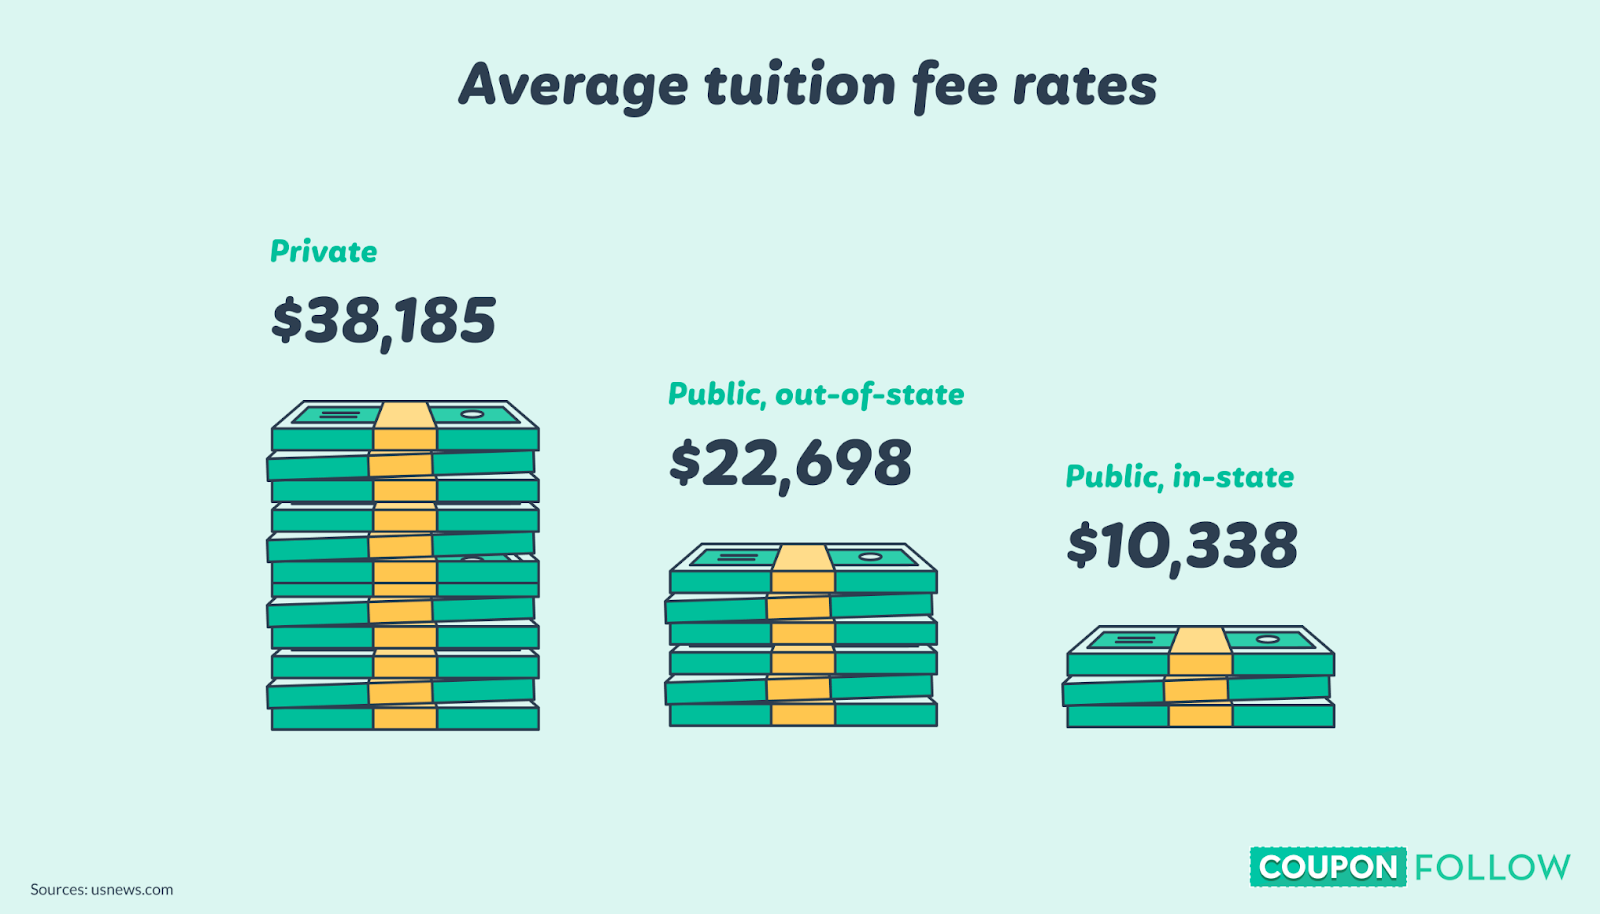 Infographic showing average tuition fee rates in the US